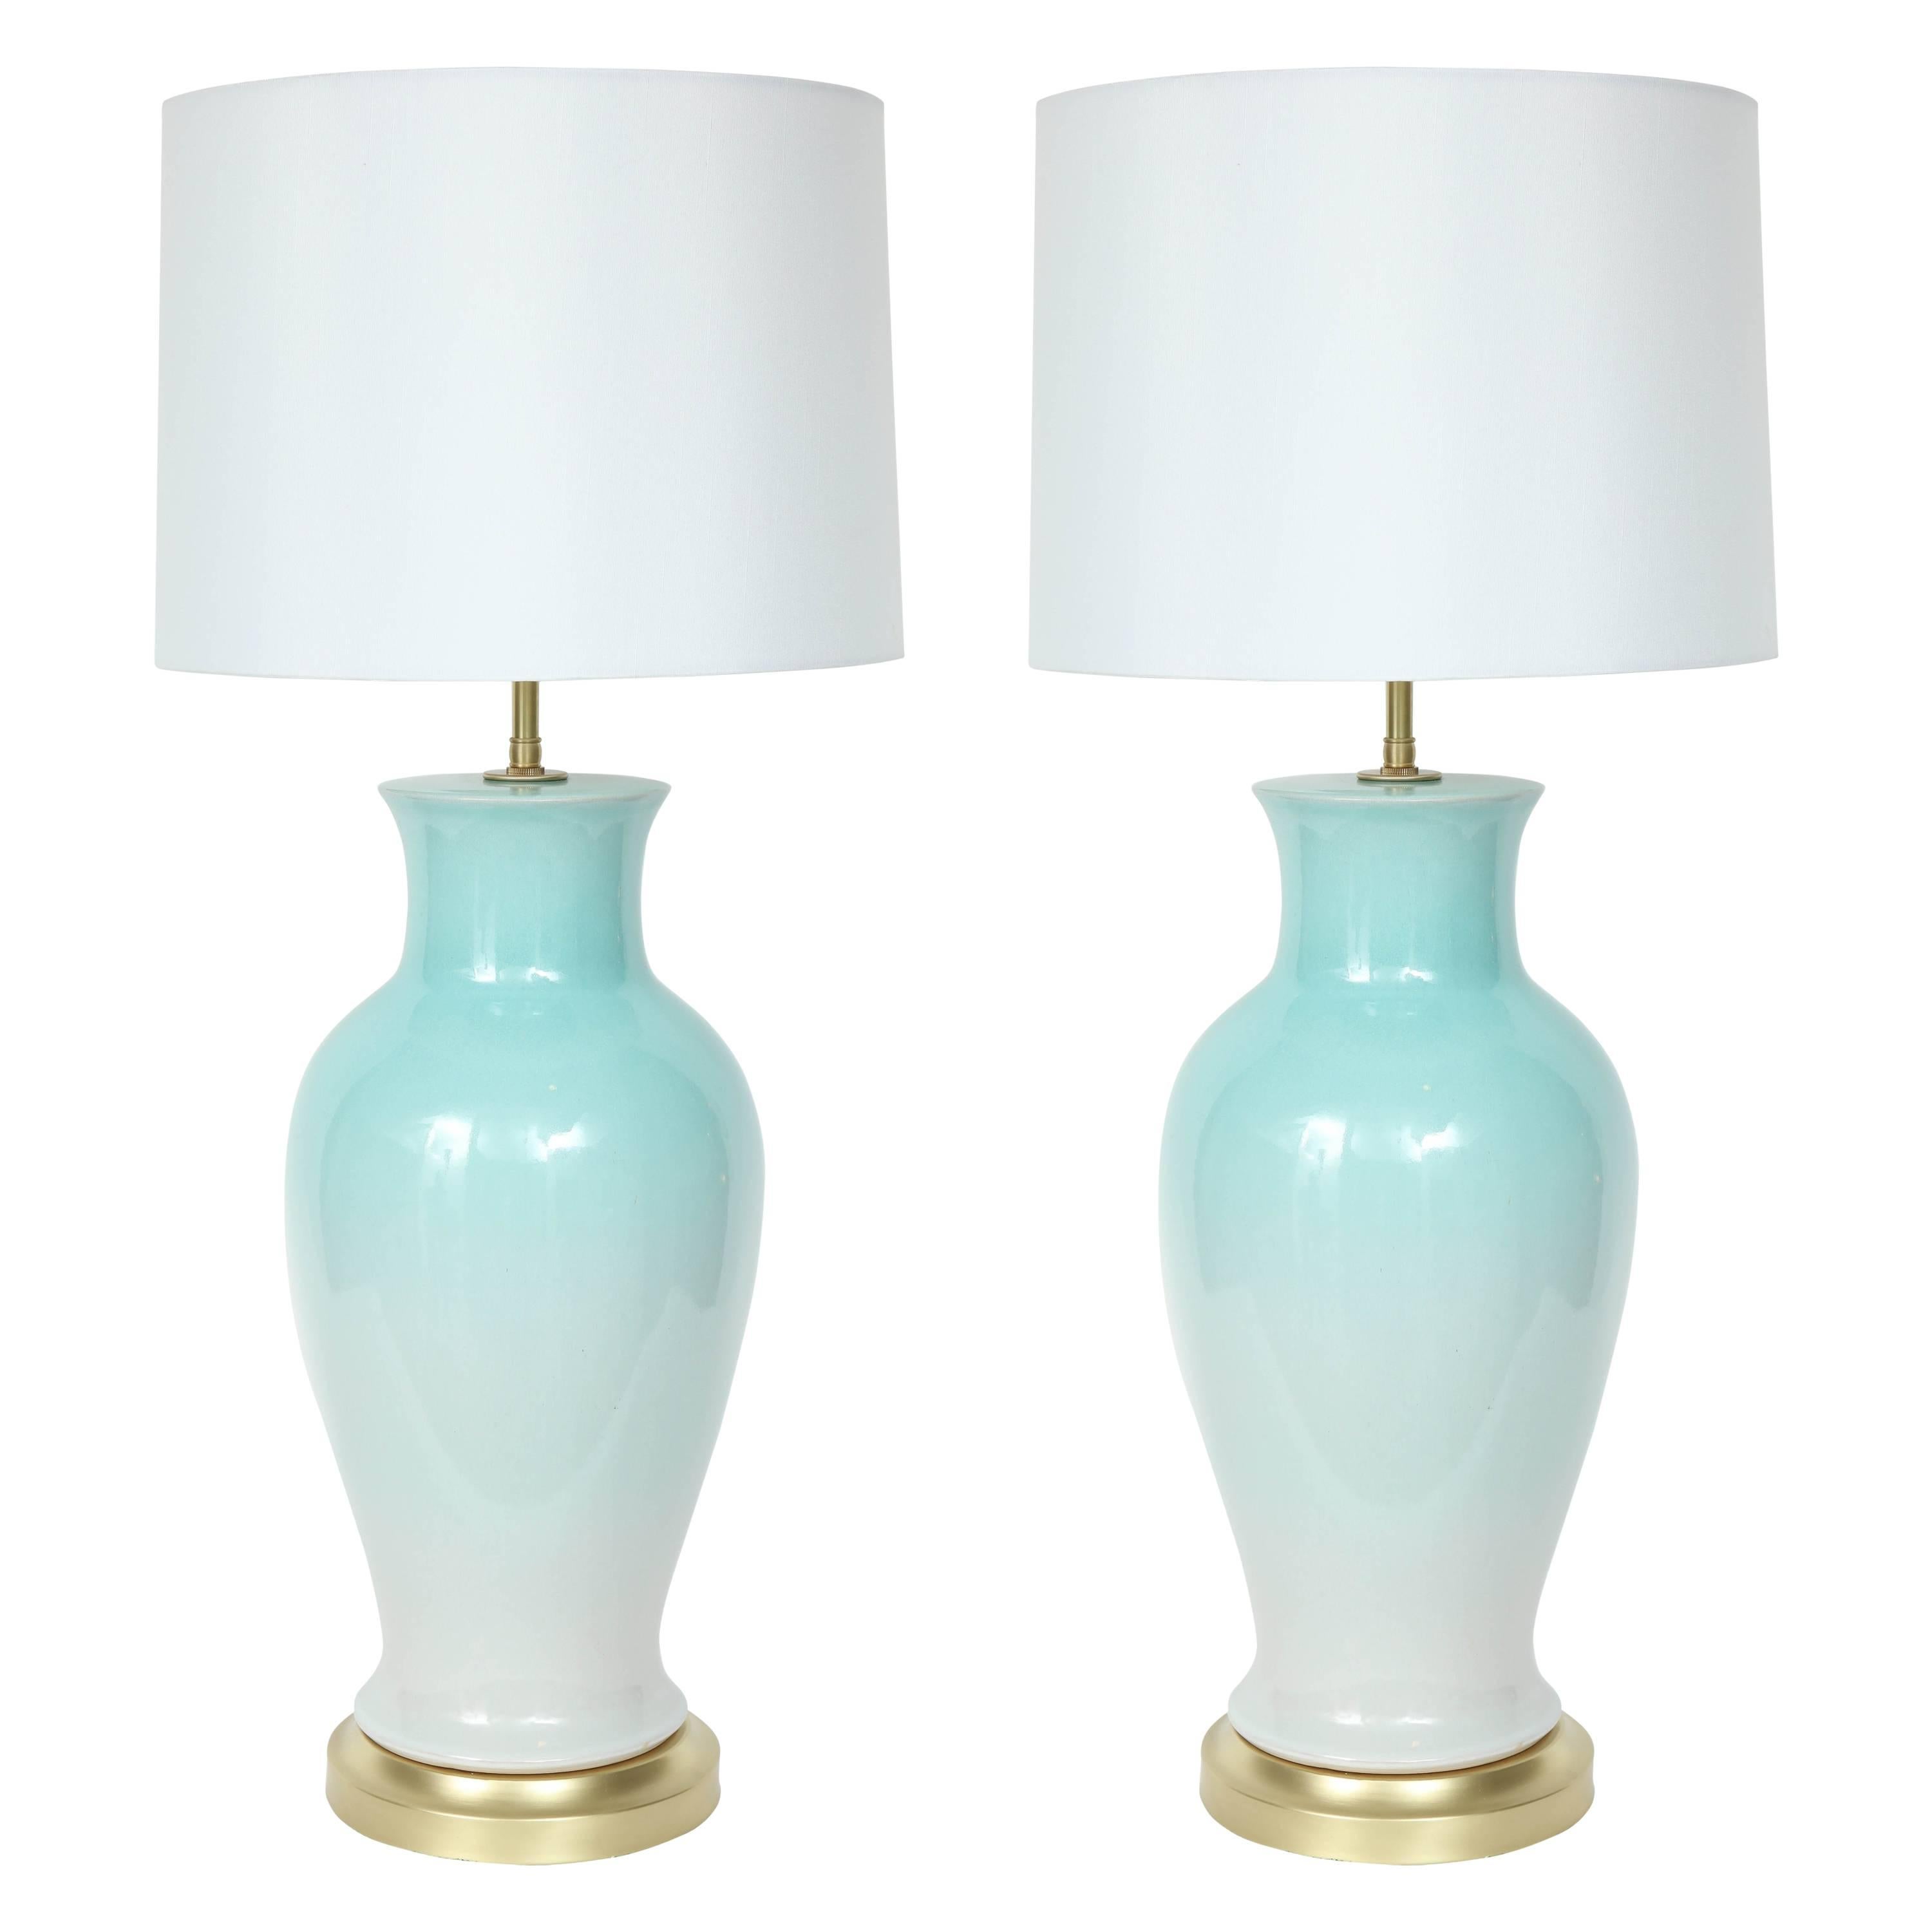 Paul Hanson Spring Green and White Ombre Glazed Lamps